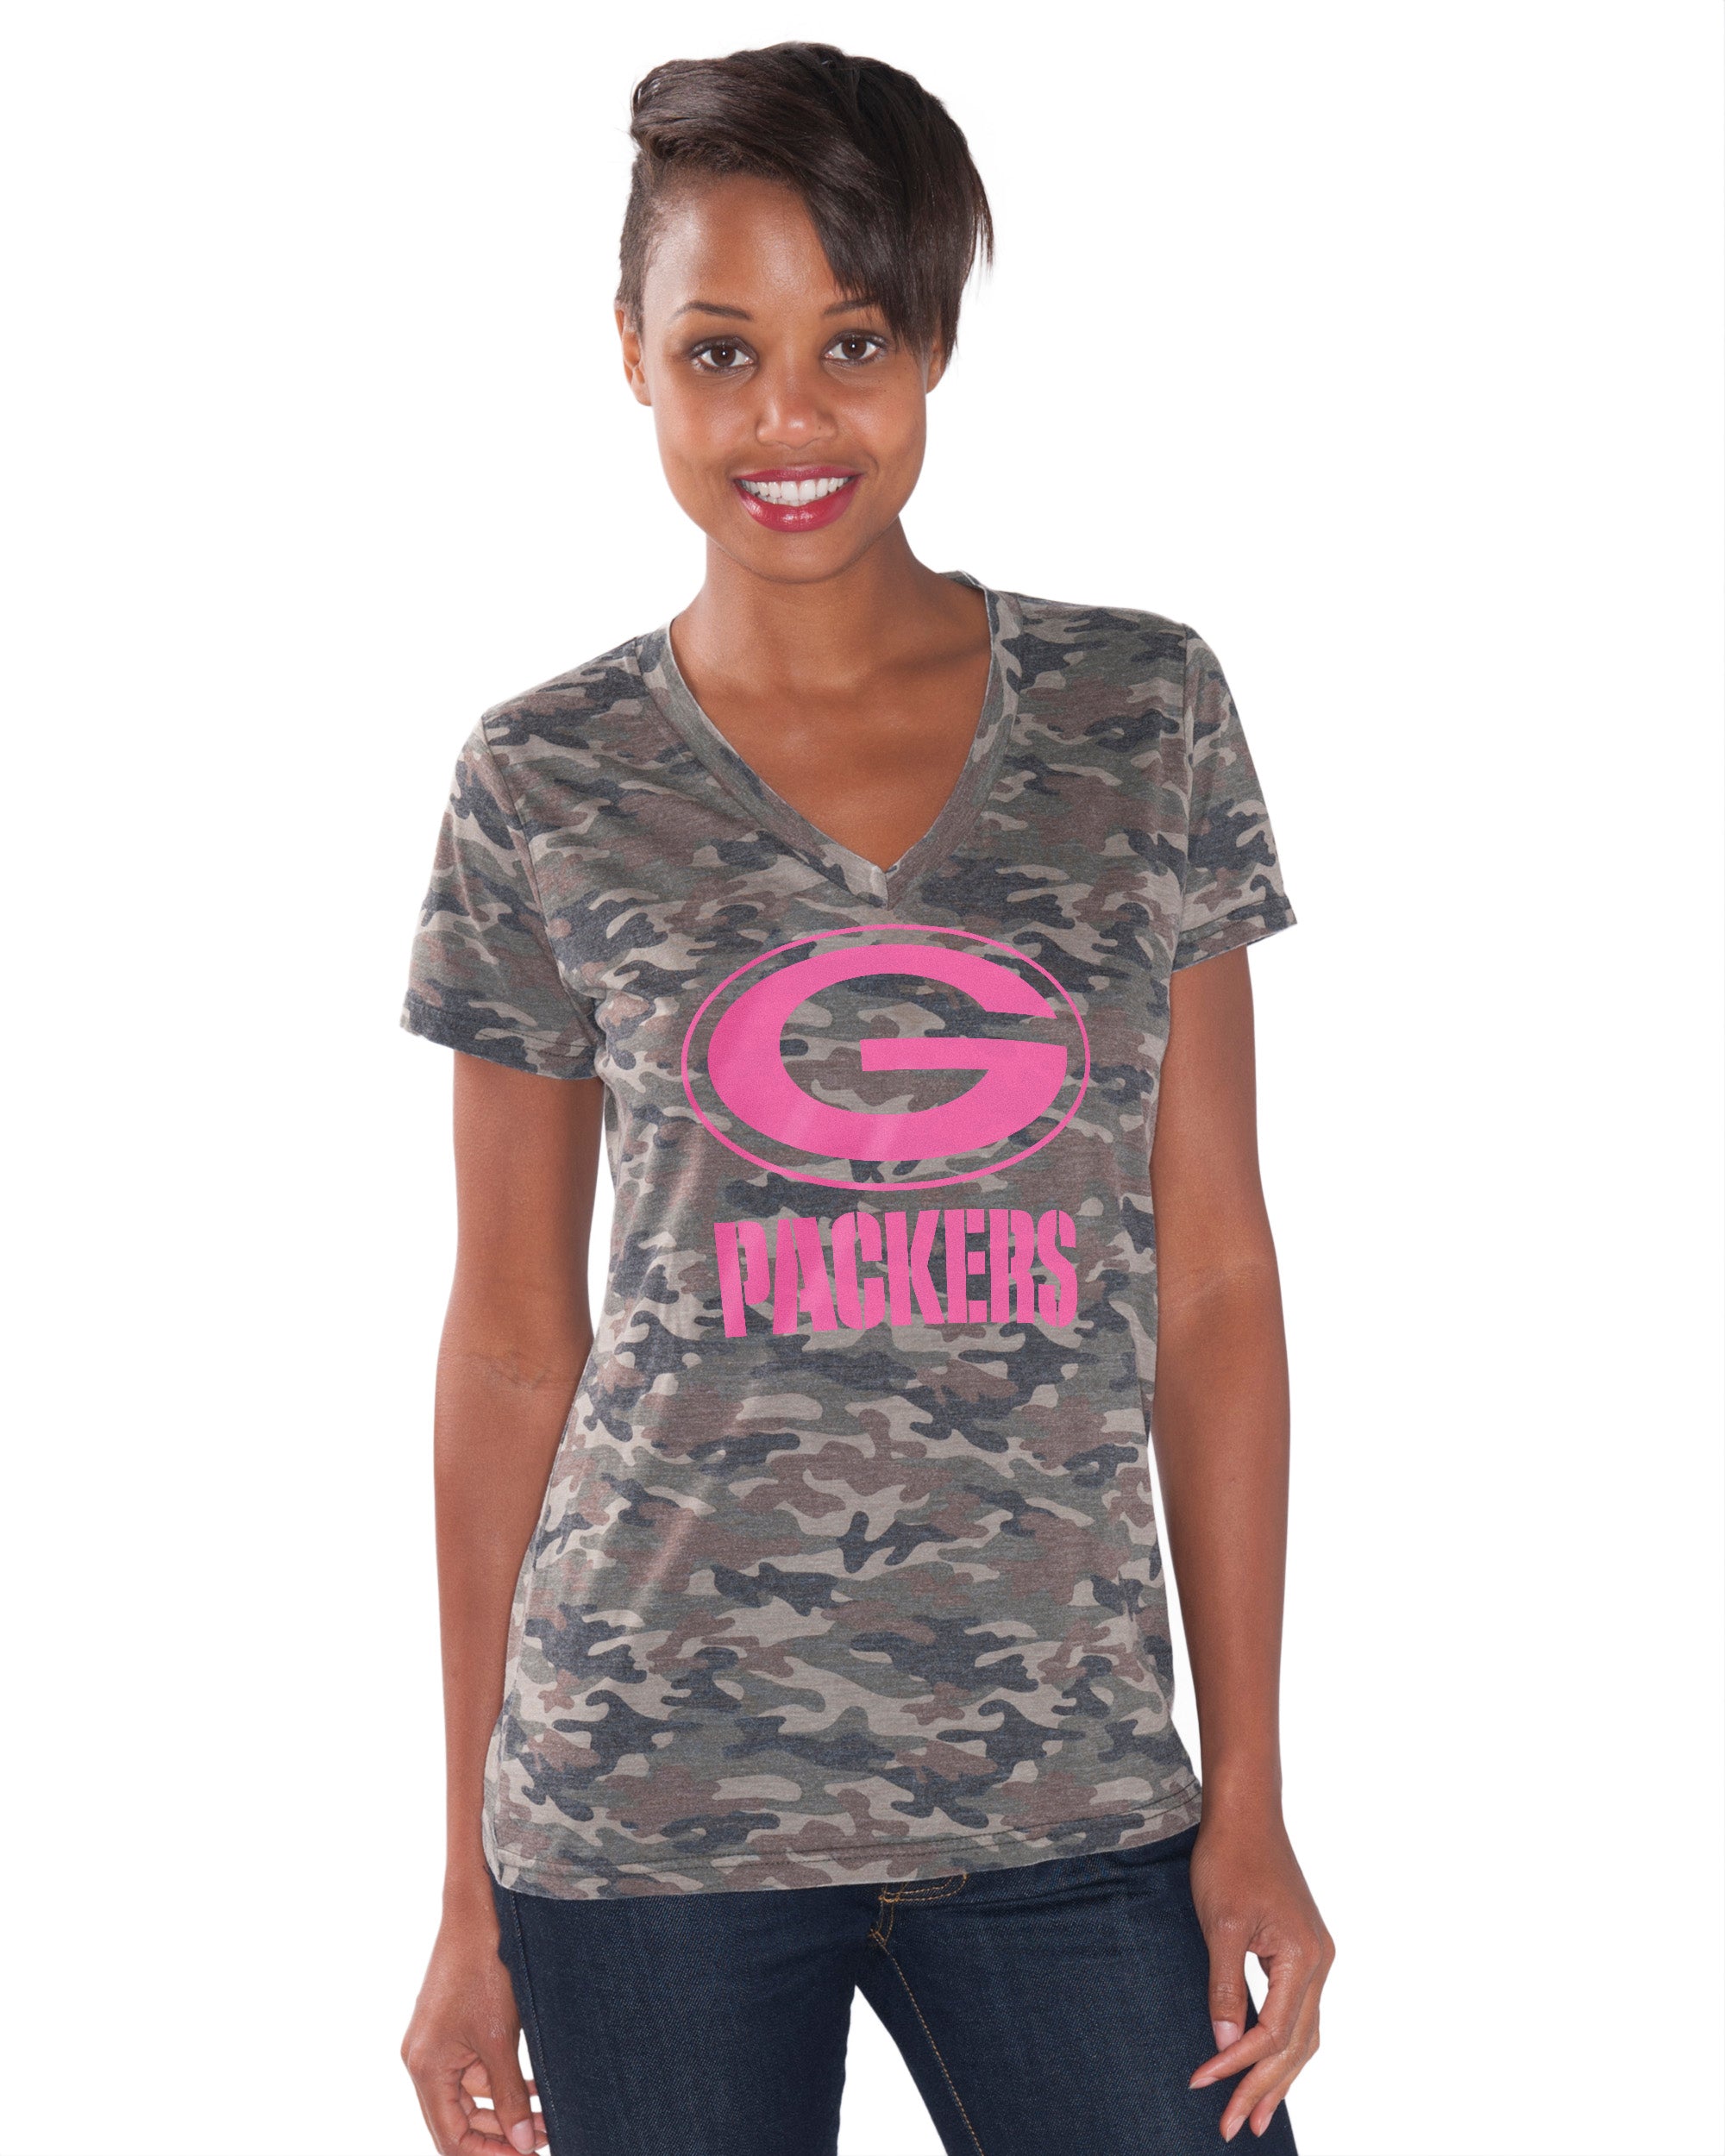 green bay packers womens apparel amazon